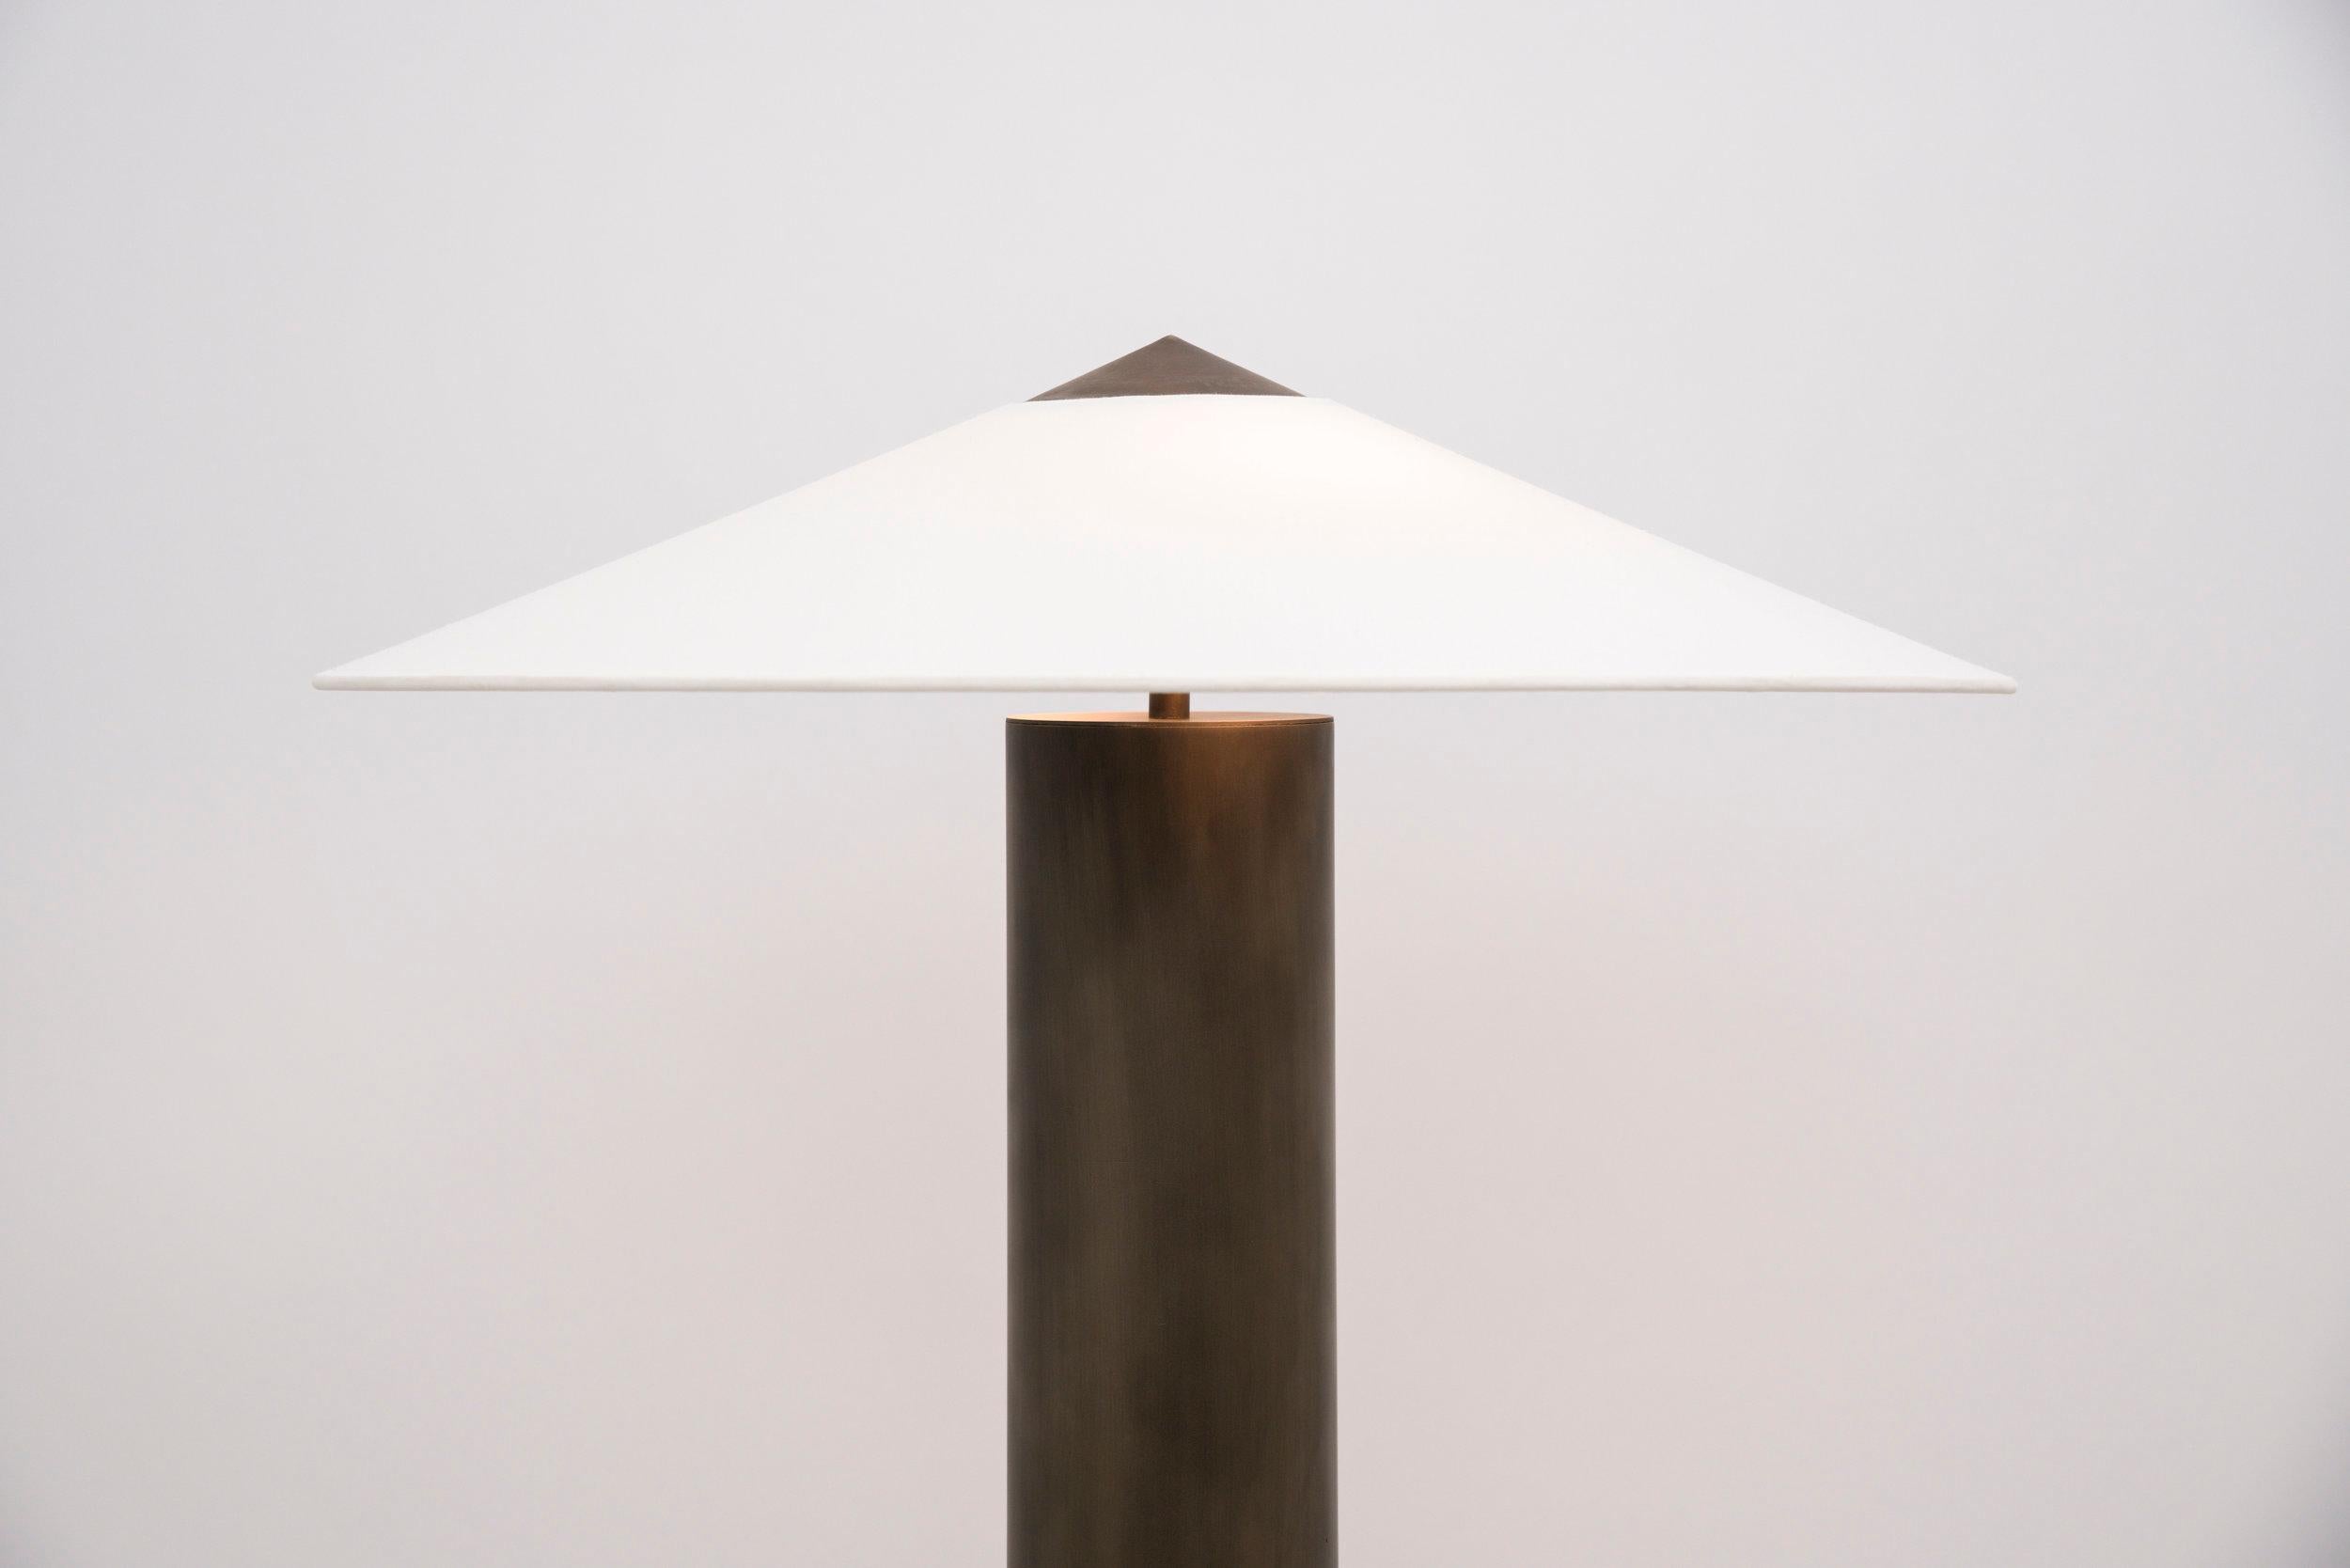 This symmetrical table lamp is comprised of an aged-brass base and a custom linen shade, which is supported by a hand-turned aged-brass CAP that continues the shade’s profile. The shade shape is inspired by a mountain and the aged-brass base